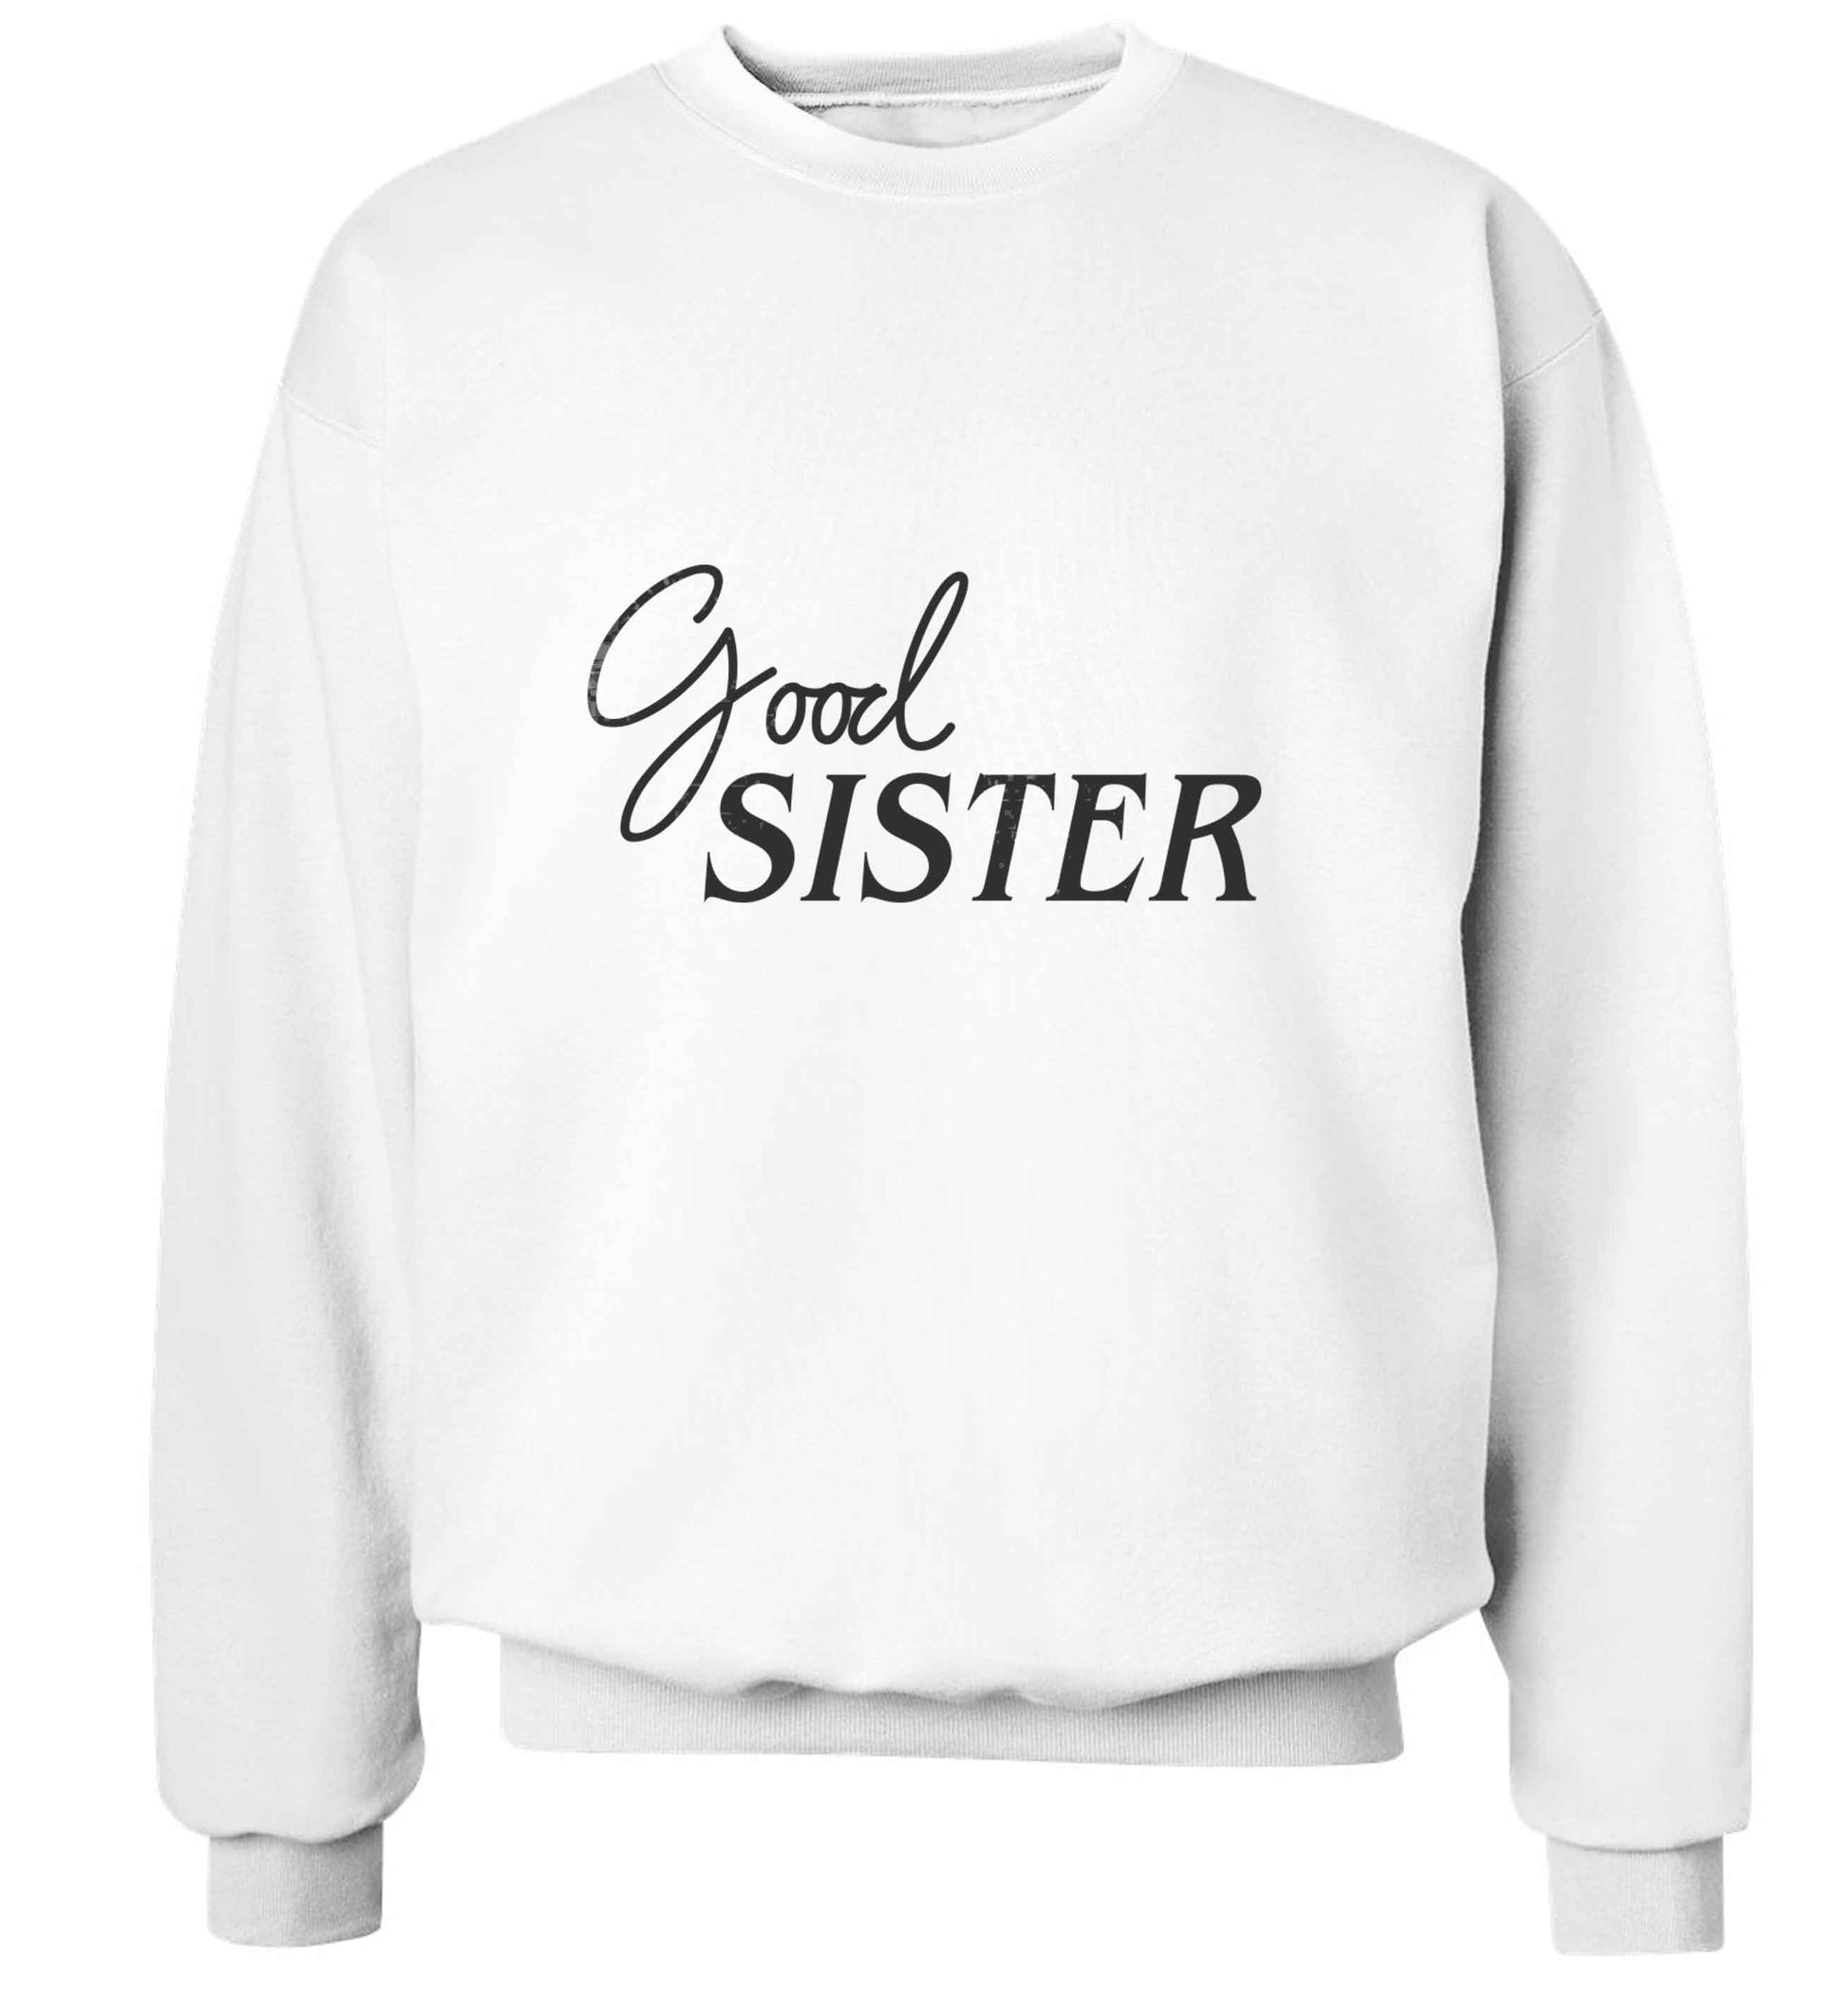 Good sister adult's unisex white sweater 2XL